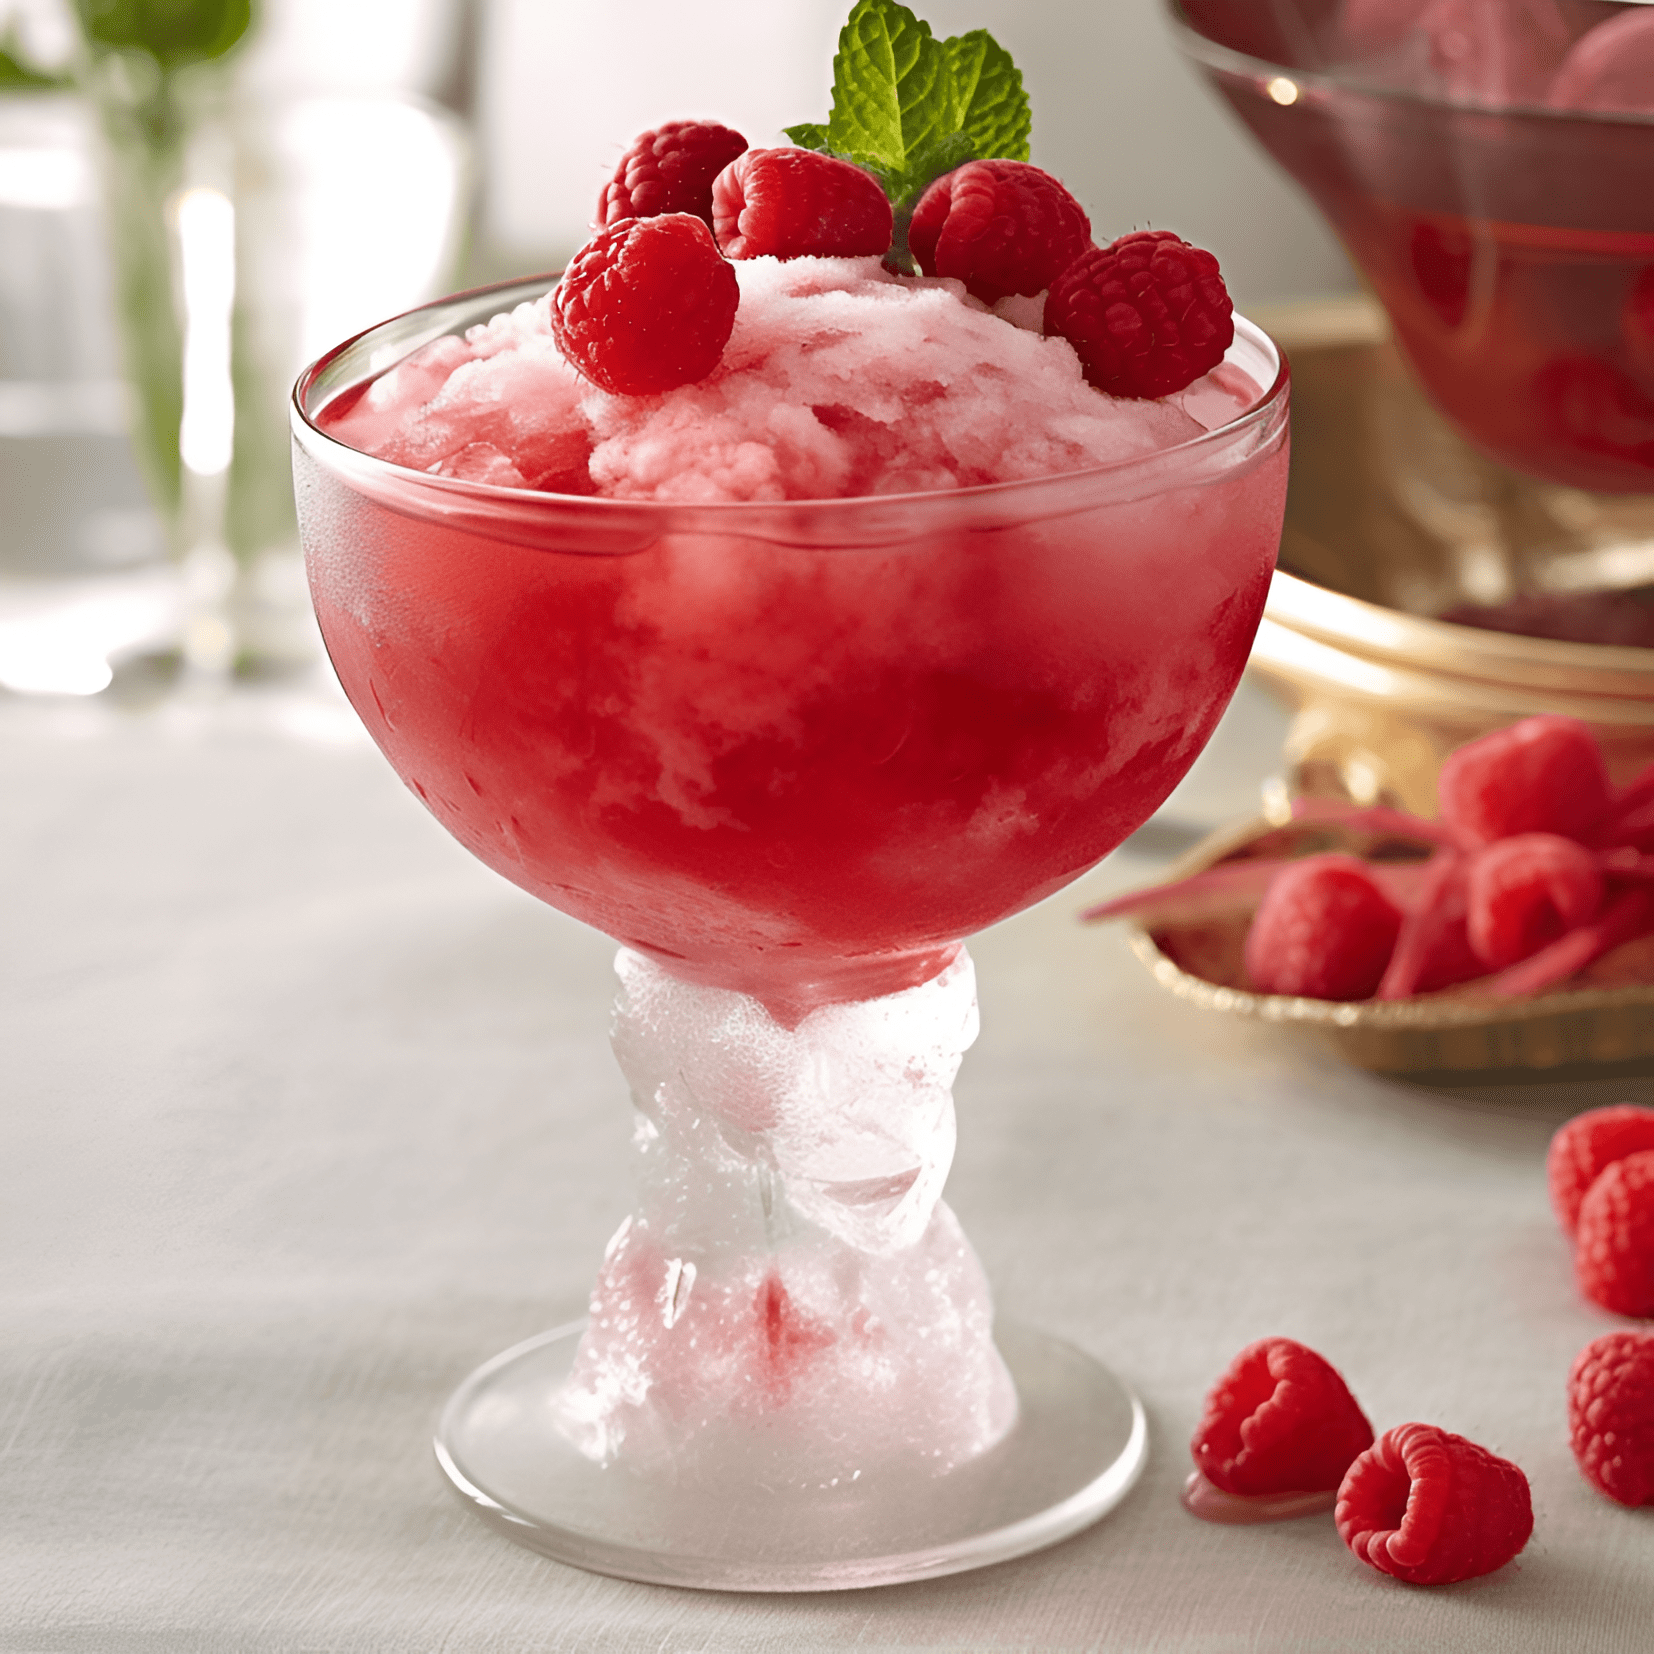 Knickerbocker Cocktail Recipe - The Knickerbocker cocktail is a delightful mix of sweet, sour, and fruity flavors. The combination of rum, raspberry syrup, and citrus juices creates a refreshing and well-balanced taste, while the hint of orange curaçao adds a touch of sophistication.